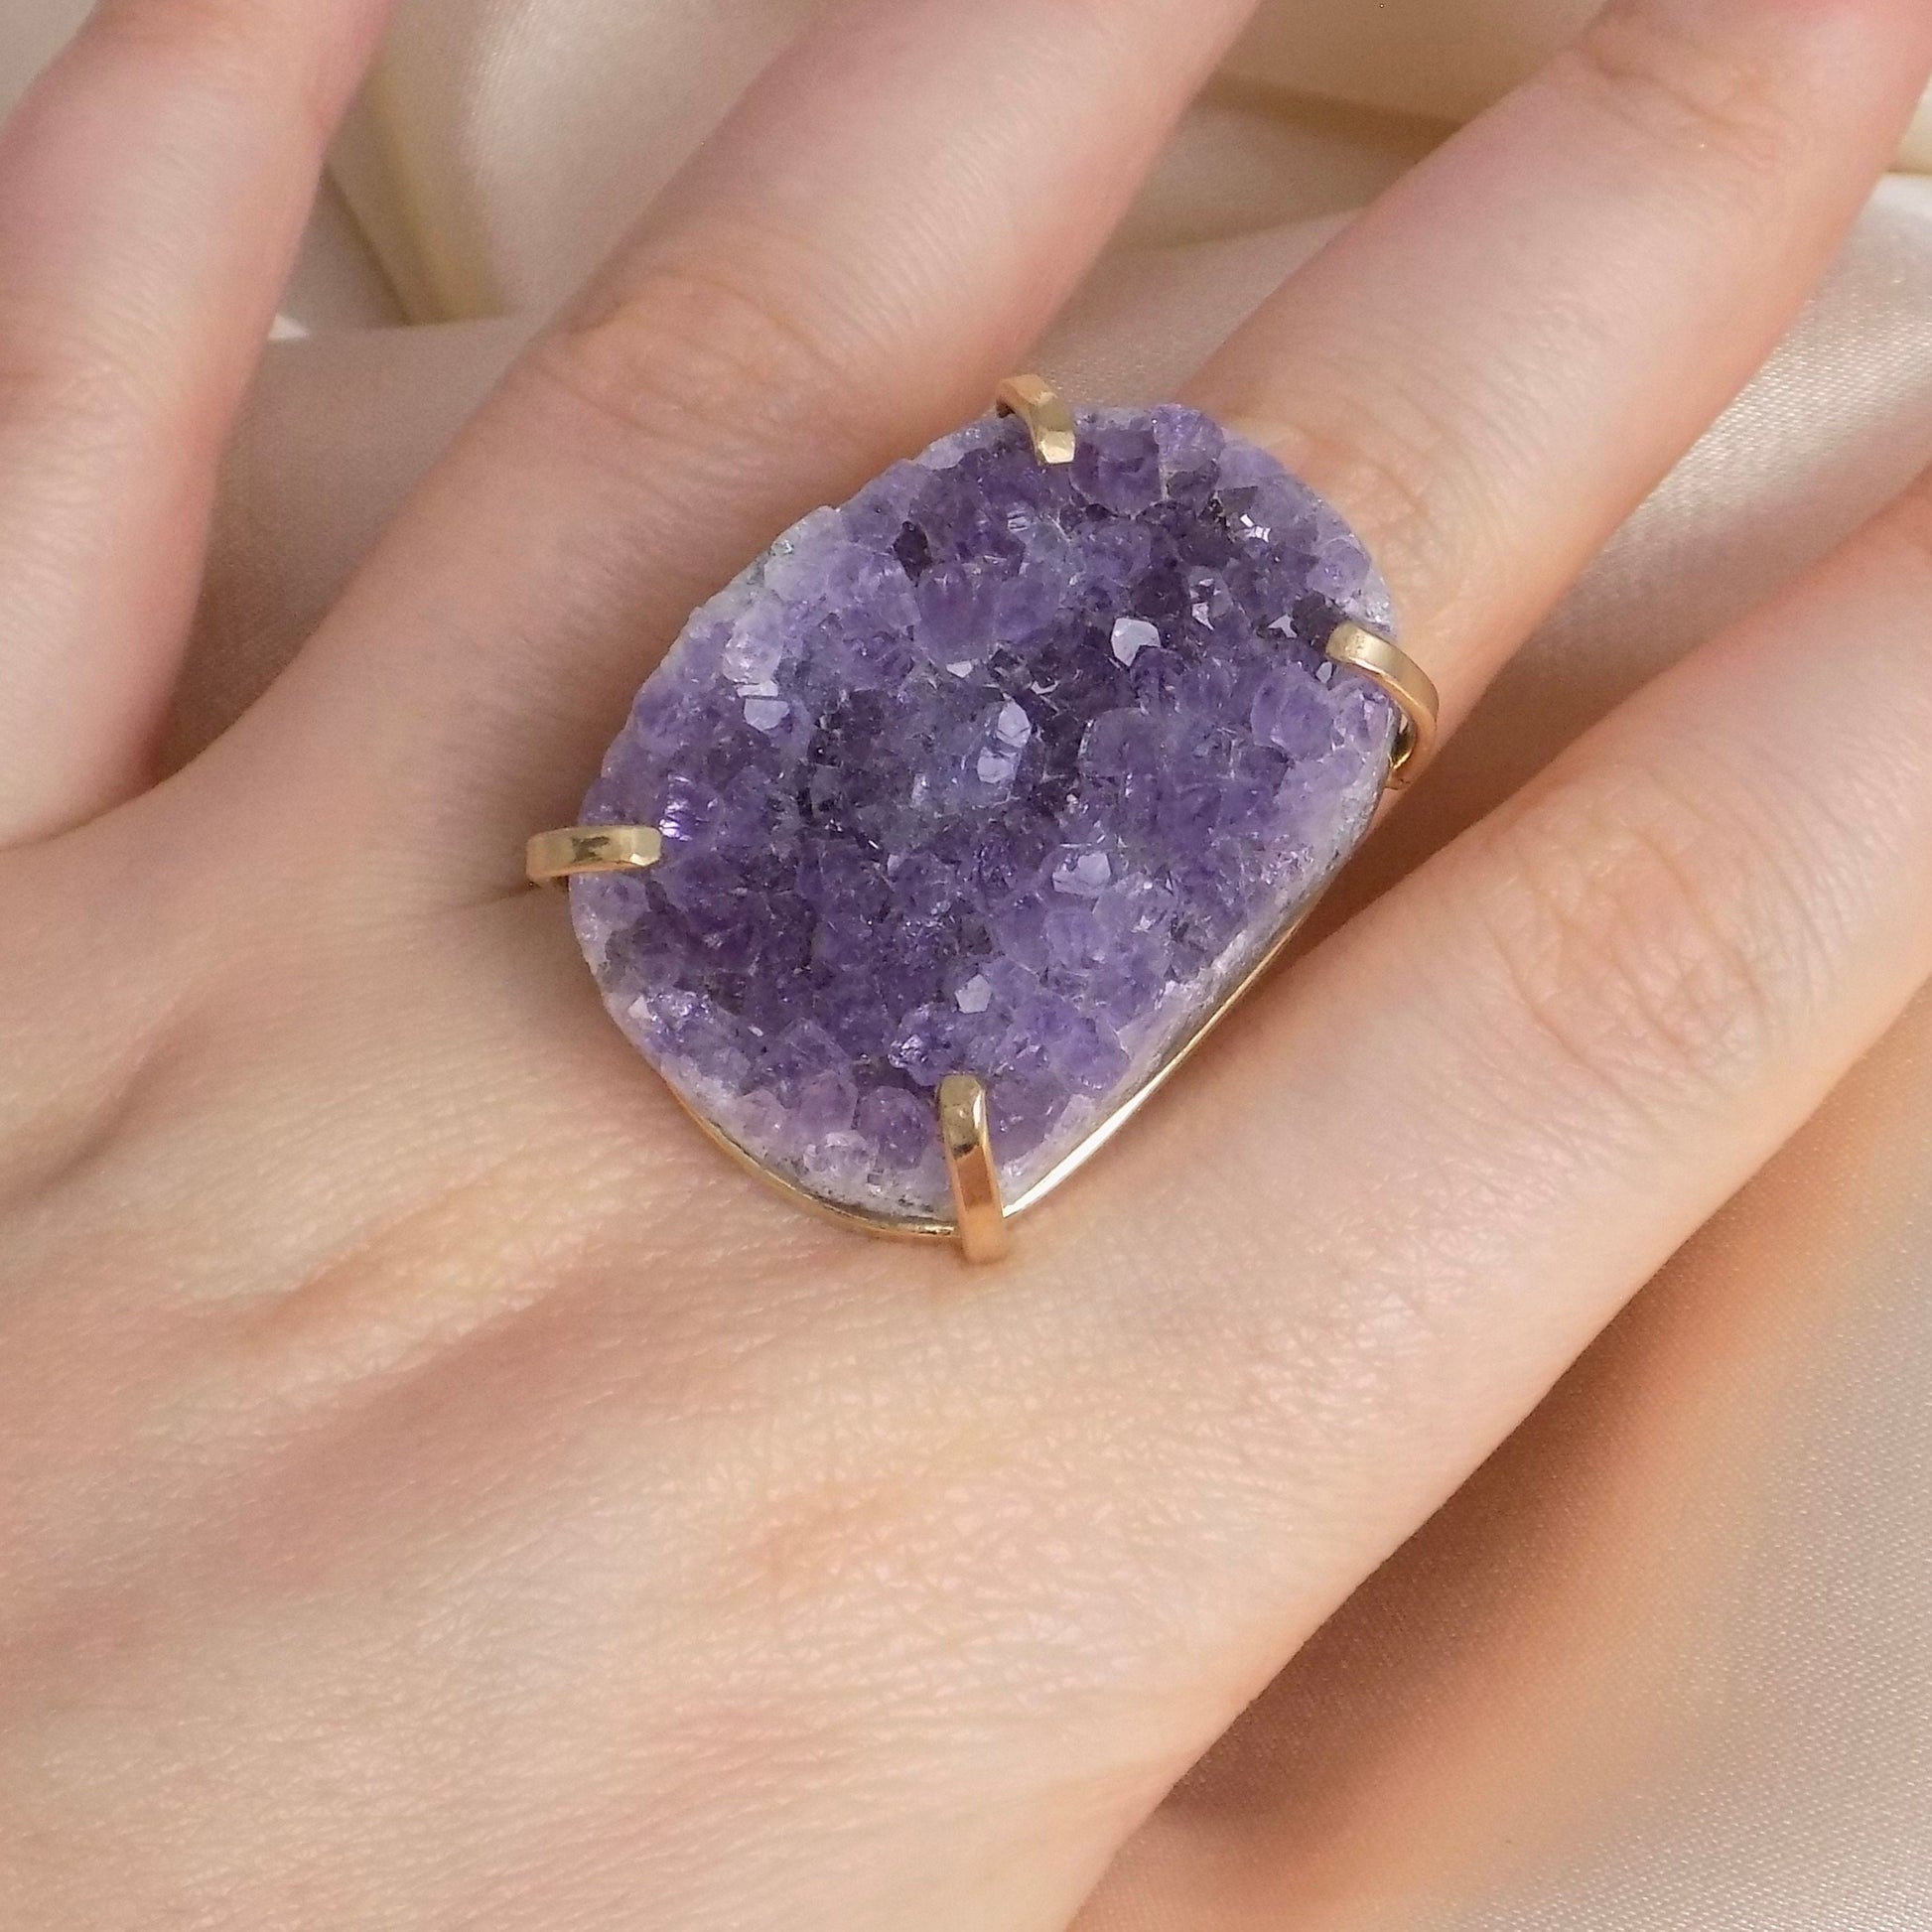 Amethyst Druzy Ring, Natural Druzy Ring, Crystal Ring, Large Gemstone Ring, Stone Ring Adjustable Ring, Statement Ring, Gift For Her G14-833